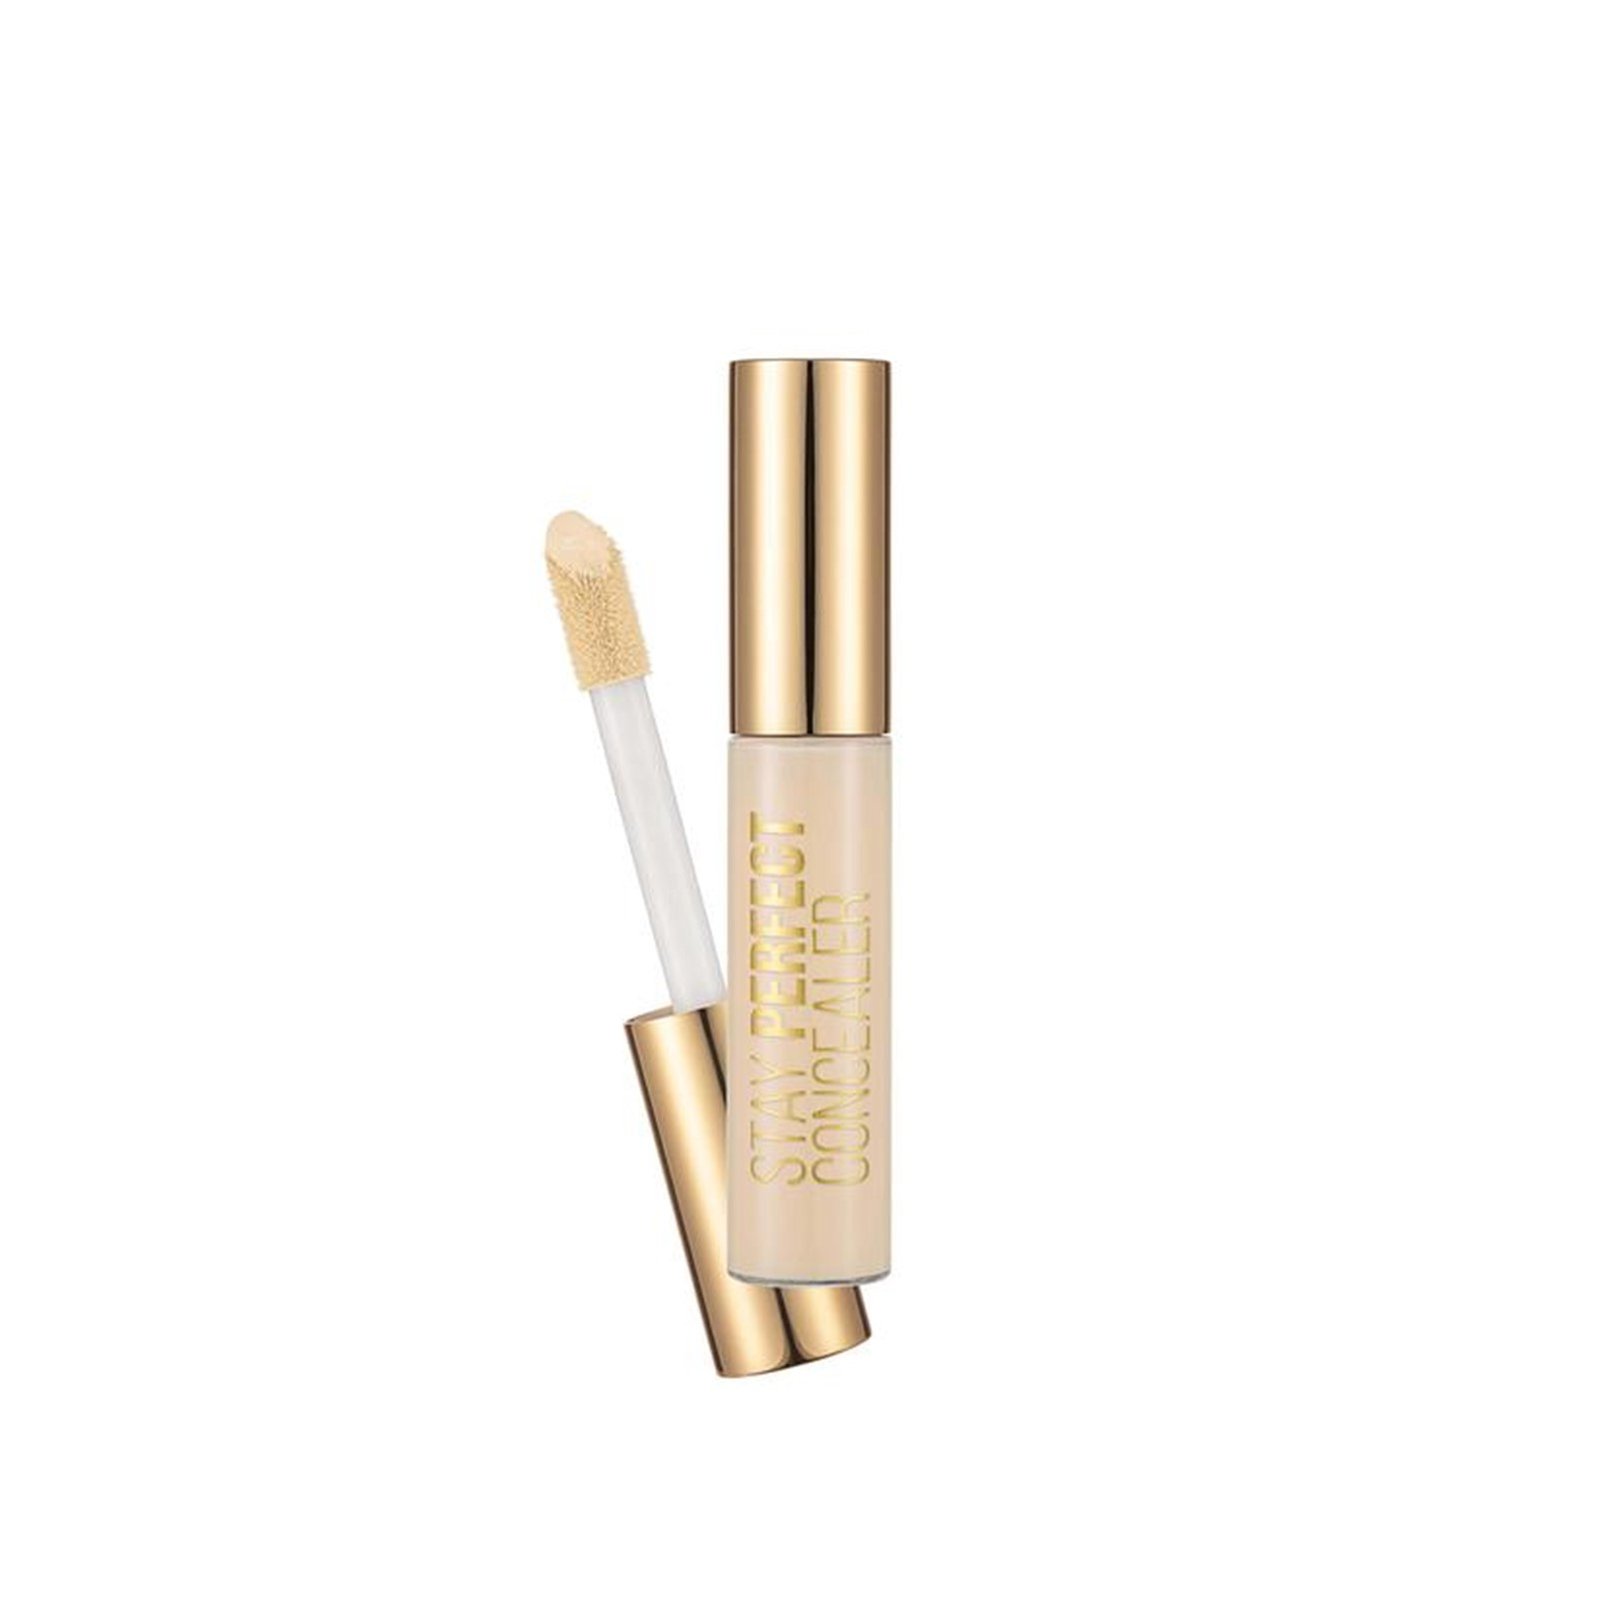 Flormar - Perfect Liquid Concealer promises you to cover